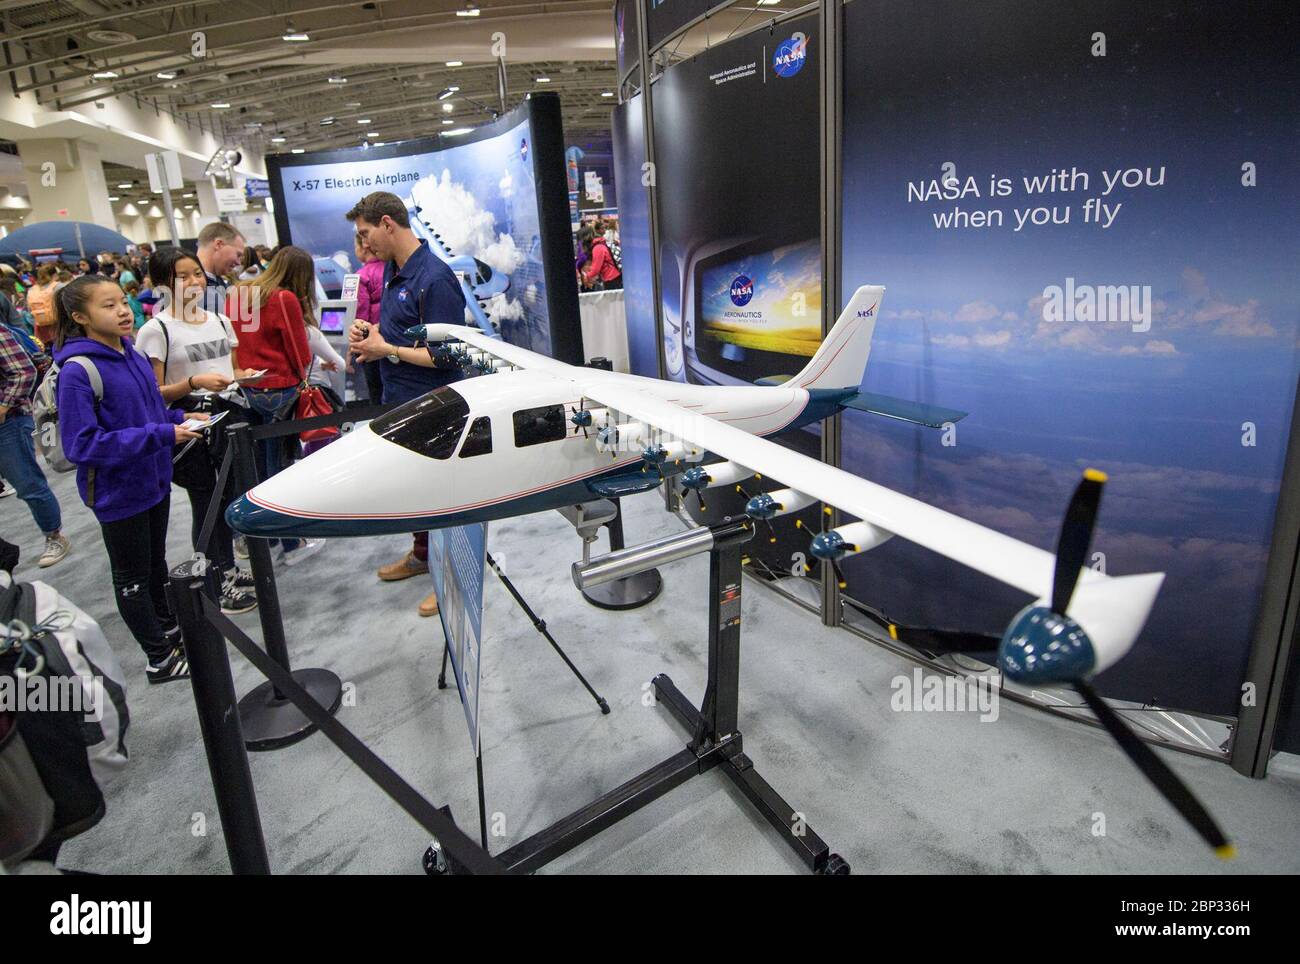 2018 USA Science and Engineering Festival   Attendees listen to a NASA staff member speak about the X-57, a research aircraft powered by 14 electric motors, during Sneak Peek Friday at the USA Science and Engineering Festival, Friday, April 6, 2018 at the Walter E. Washington Convention Center in Washington, DC.  The festival is open to the public April 7-8. Stock Photo